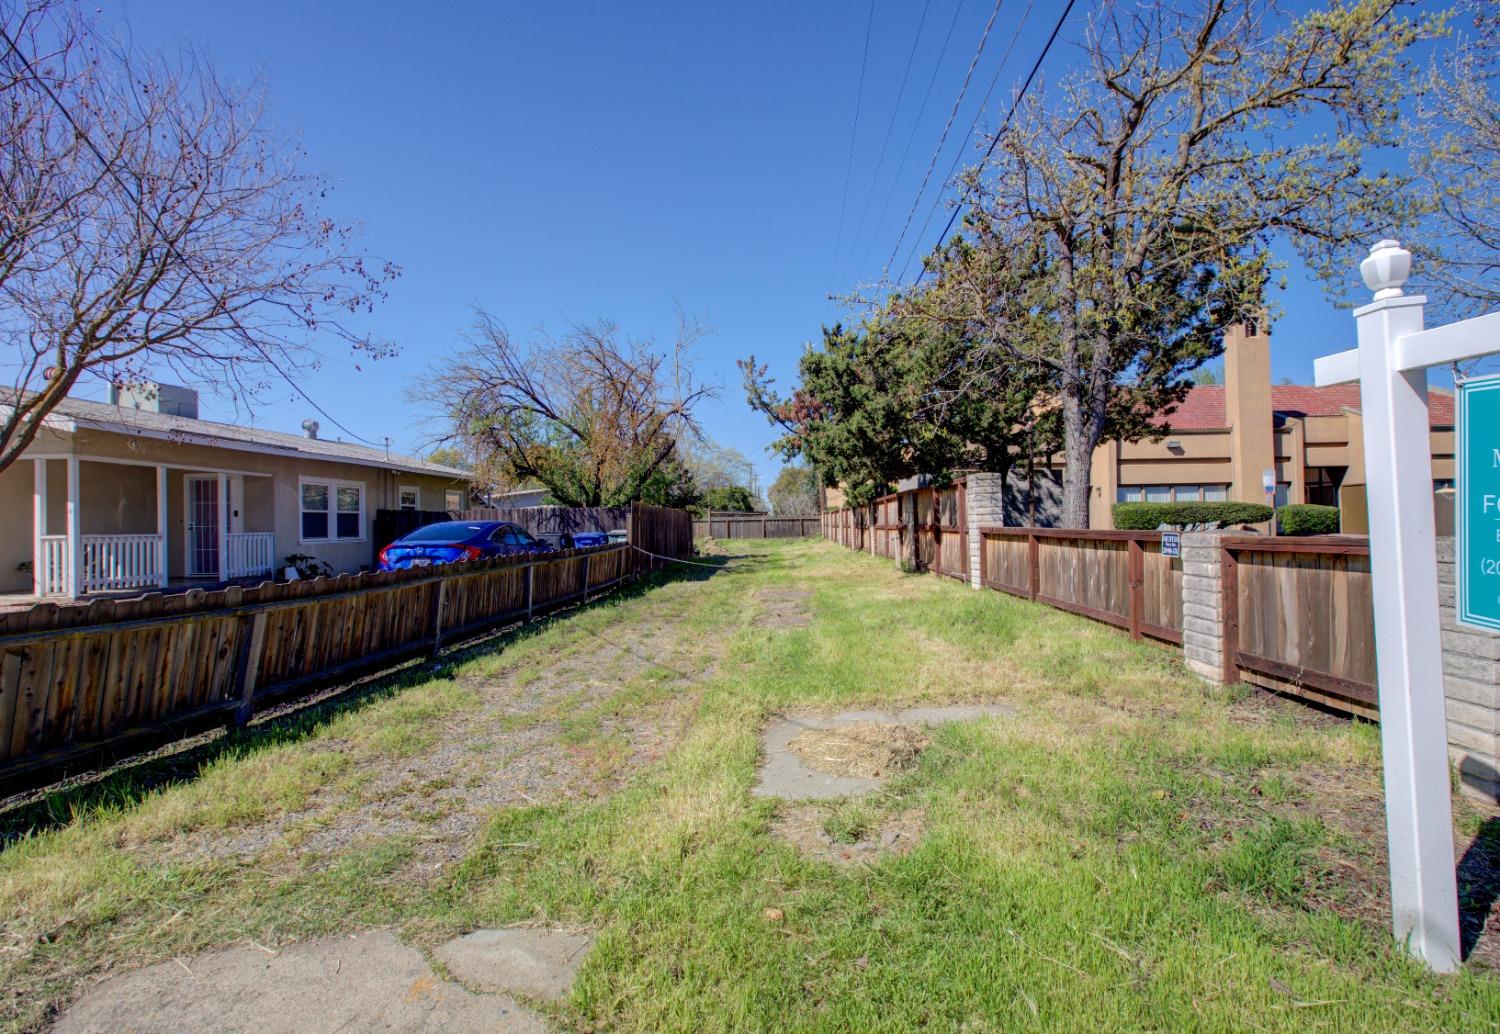 Photo of 1553 Ford Ave in Modesto, CA